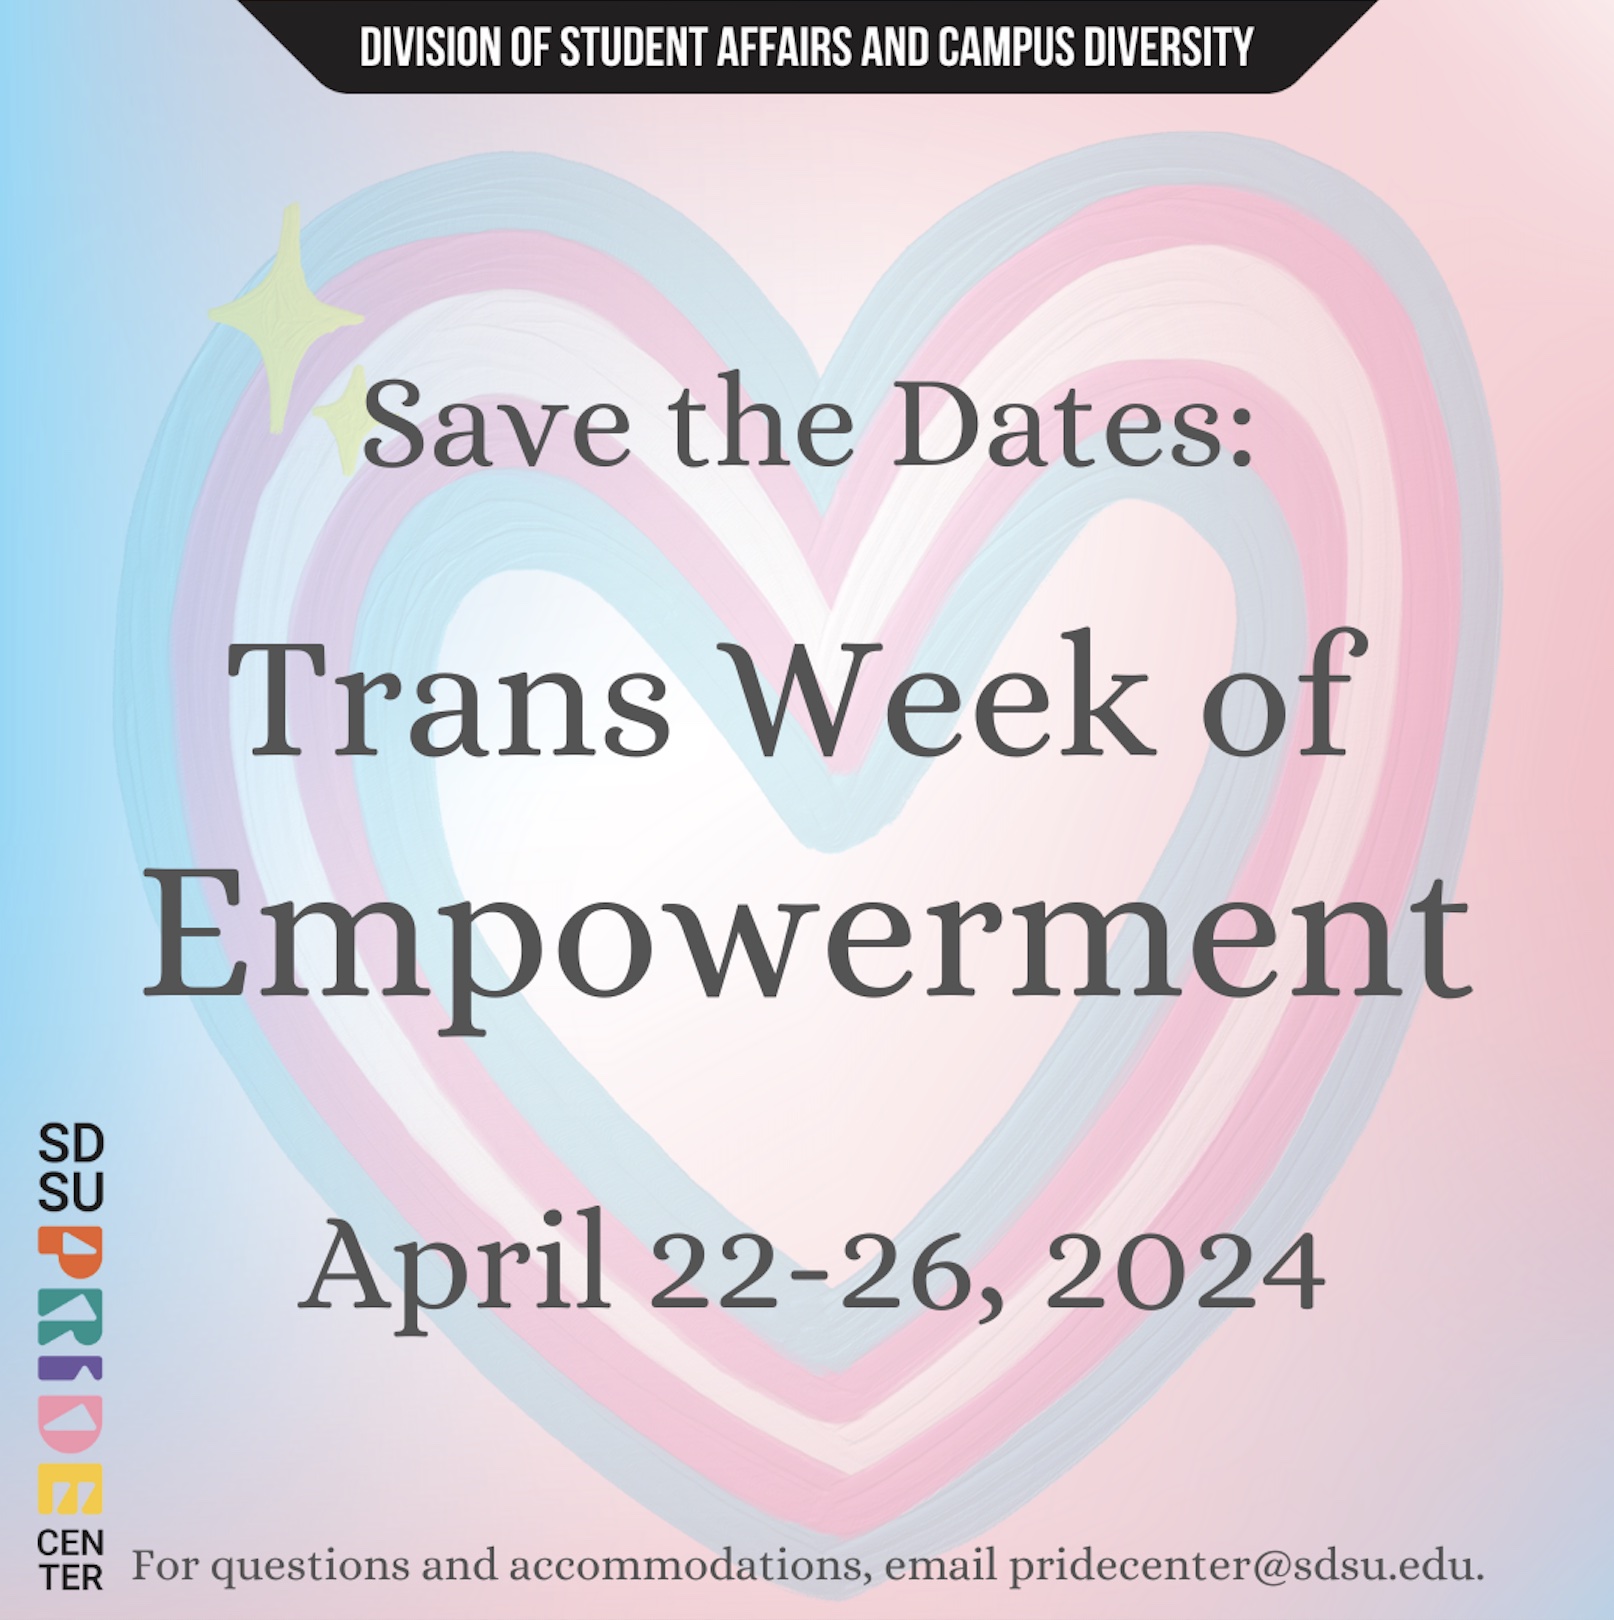 pink and blue heart with text saying Save the Dates: Trans Week of Empowerment April 22-26, 2024